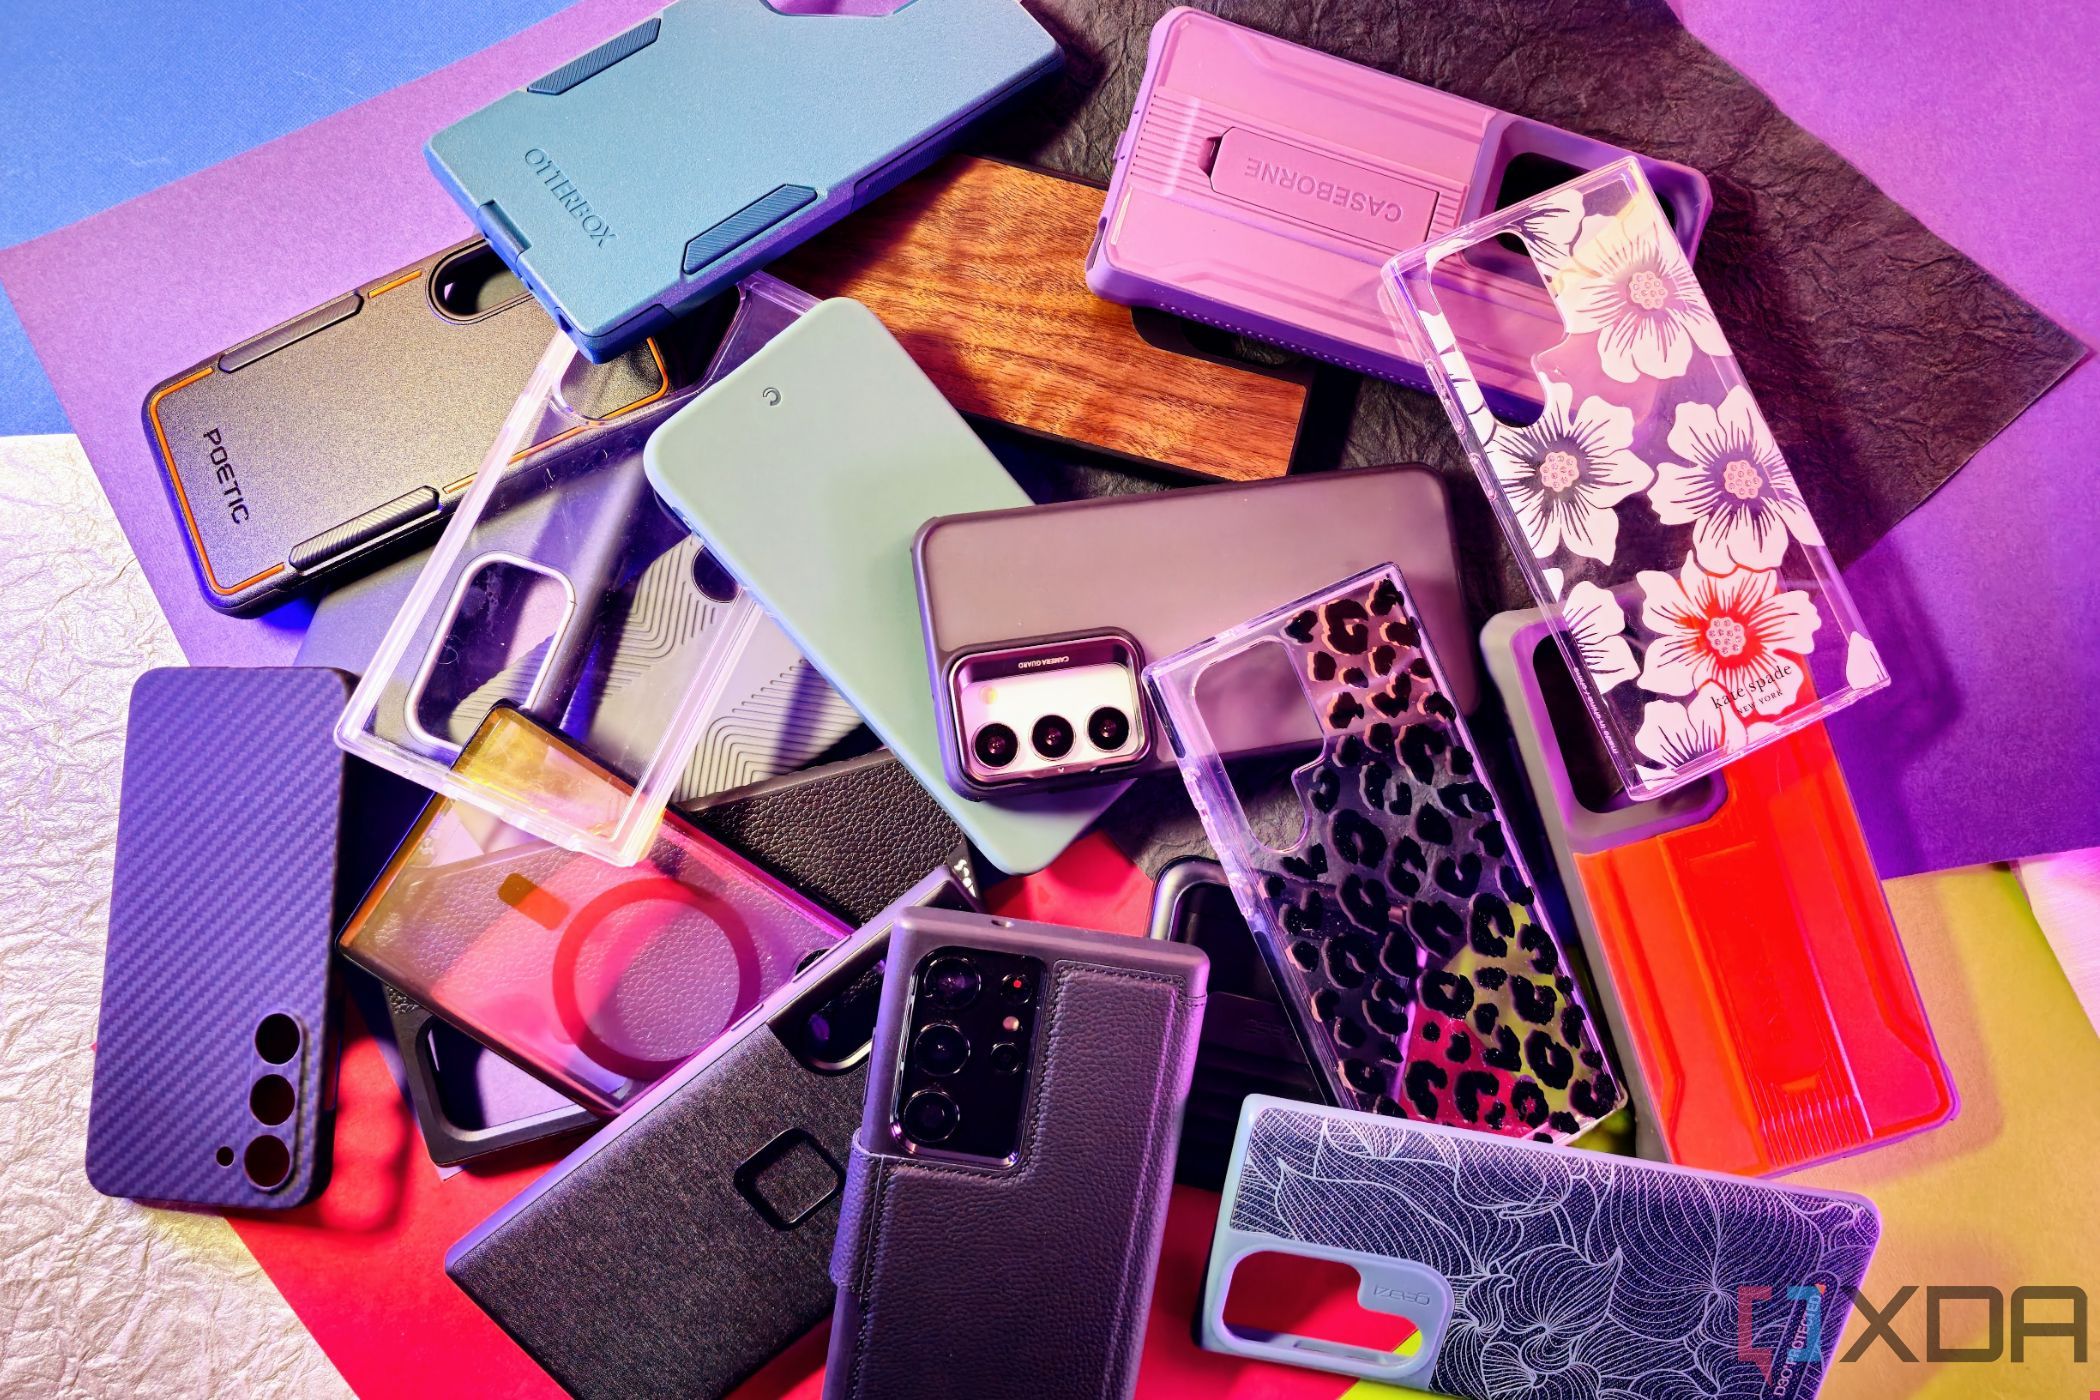 Pile of phone cases from Spigen, Speck, Otterbox, Incipio, Thinbourne, Casebourne, Peak, Mous, and more